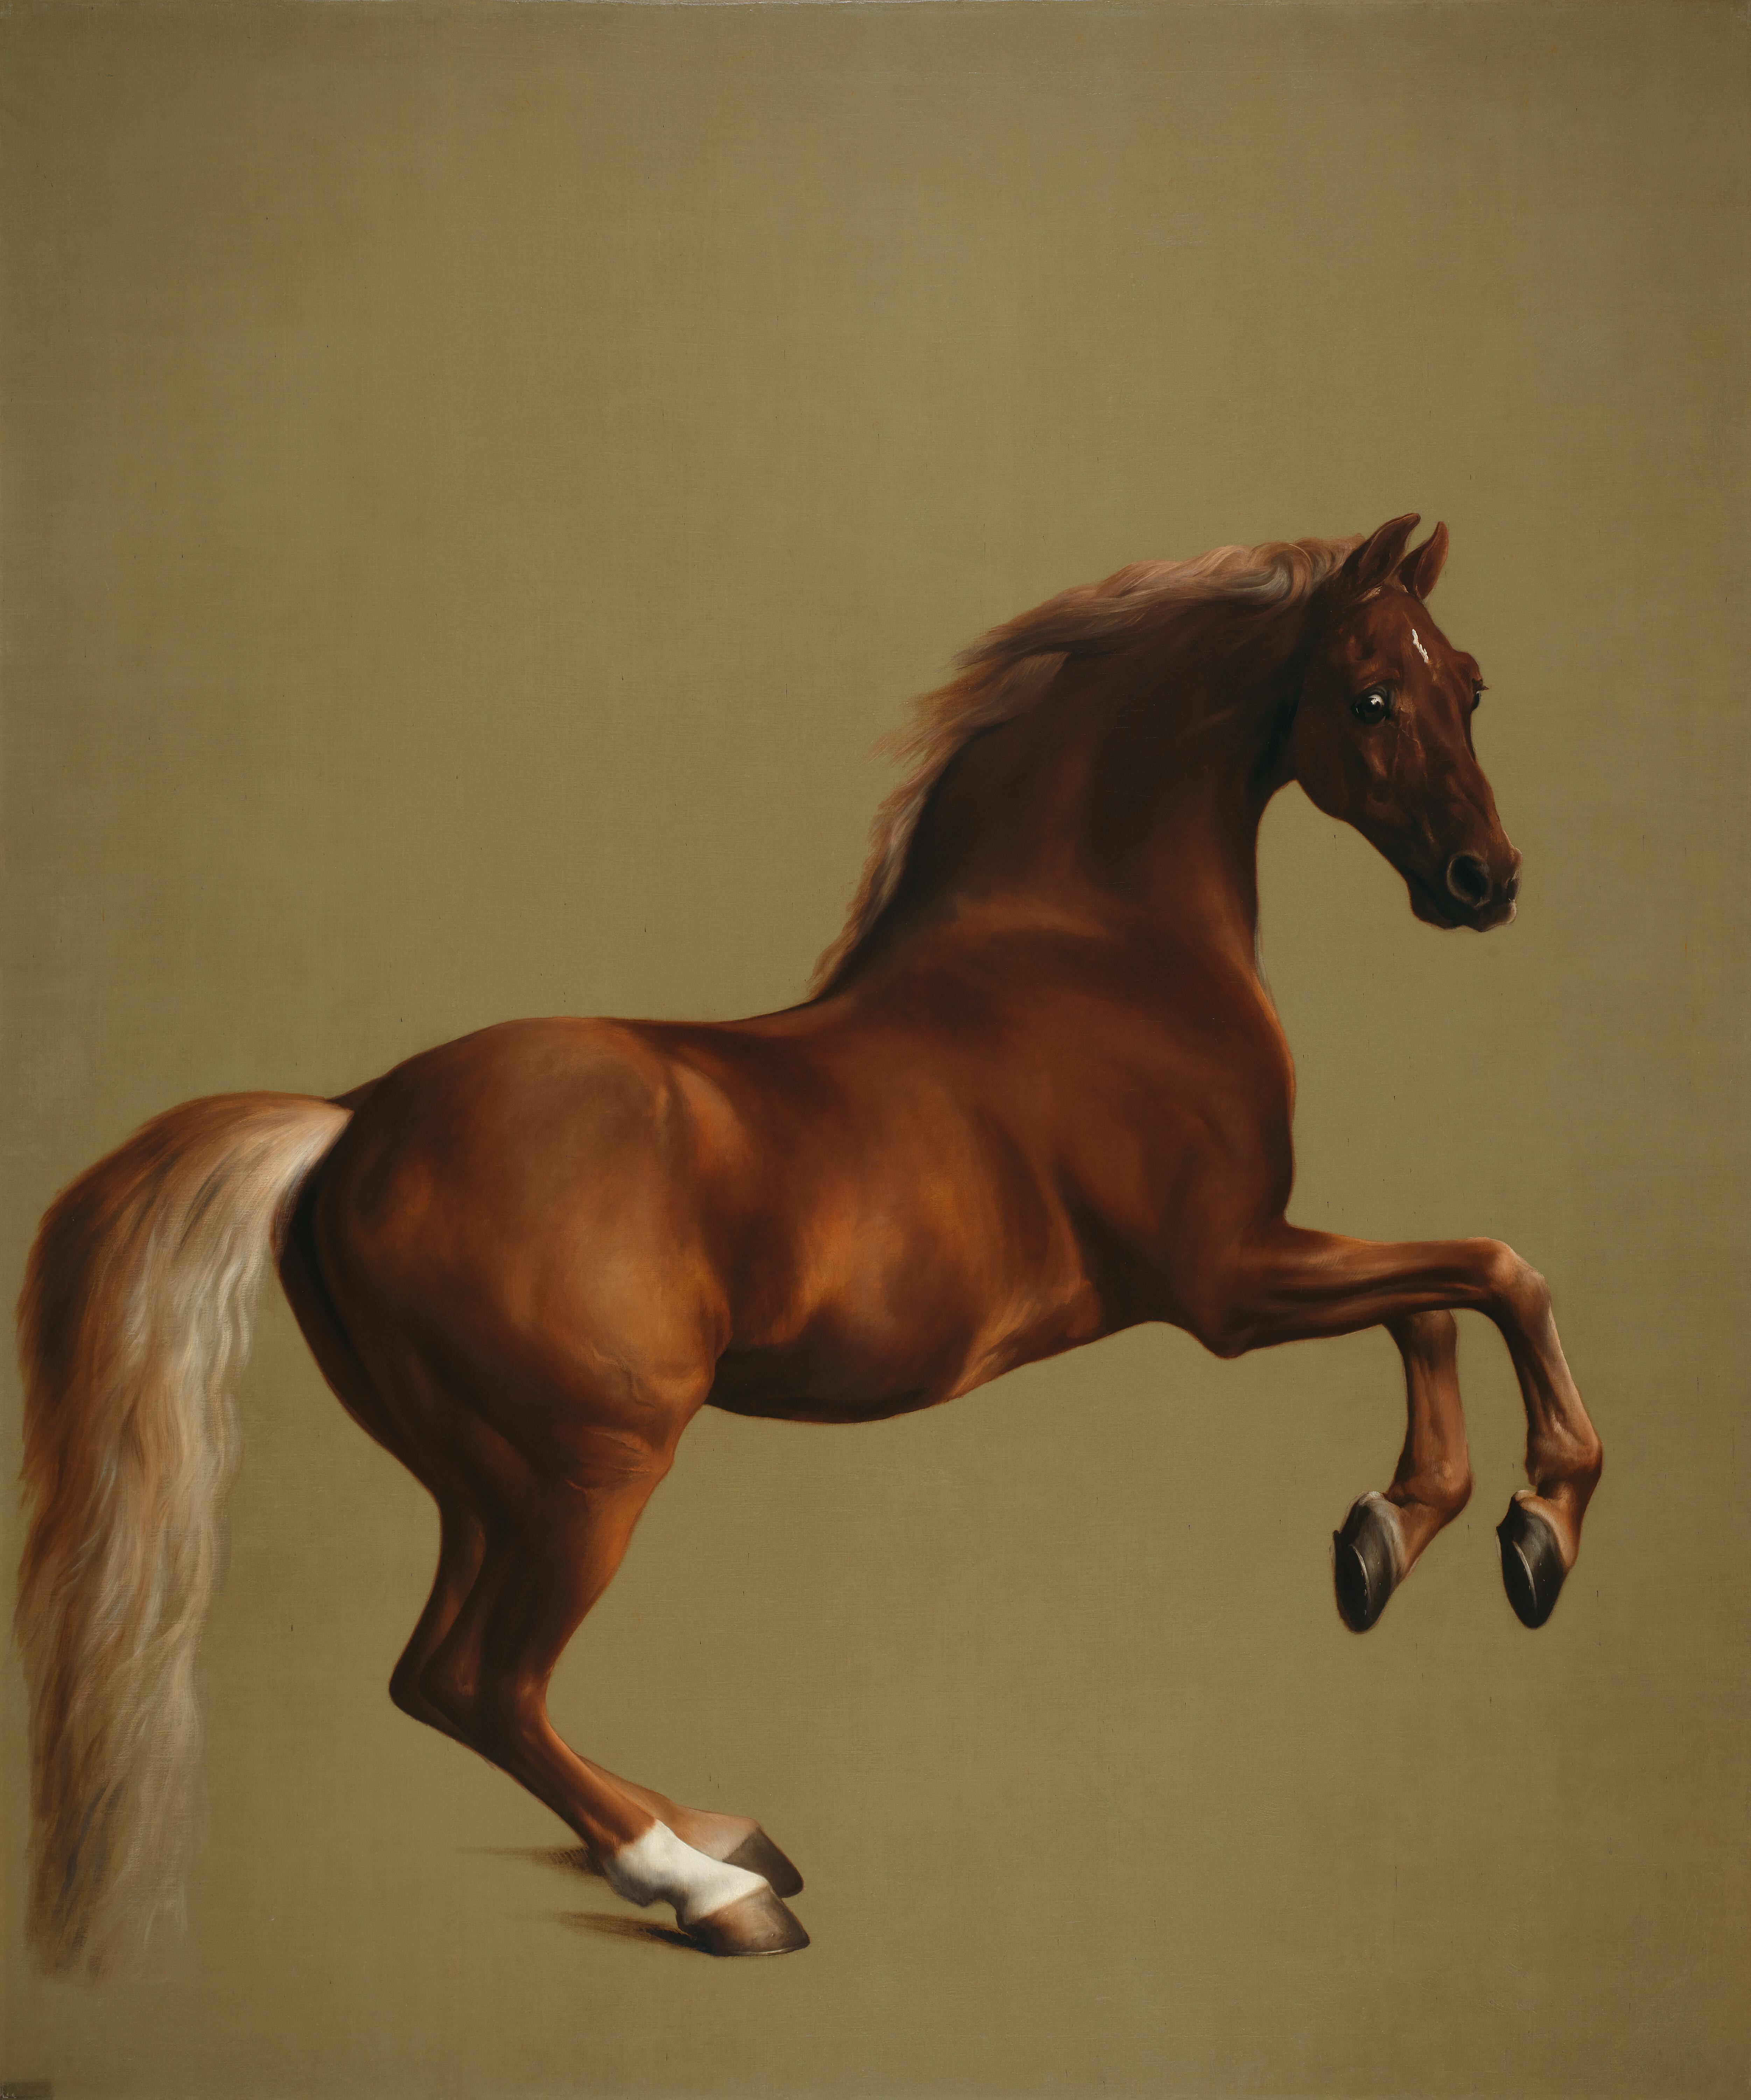 Whistlejacket (1762): This painting is one of Stubbs's most famous works. It depicts a racehorse named Whistlejacket in full gallop. The painting is known for its realism and its depiction of the horse's movement.